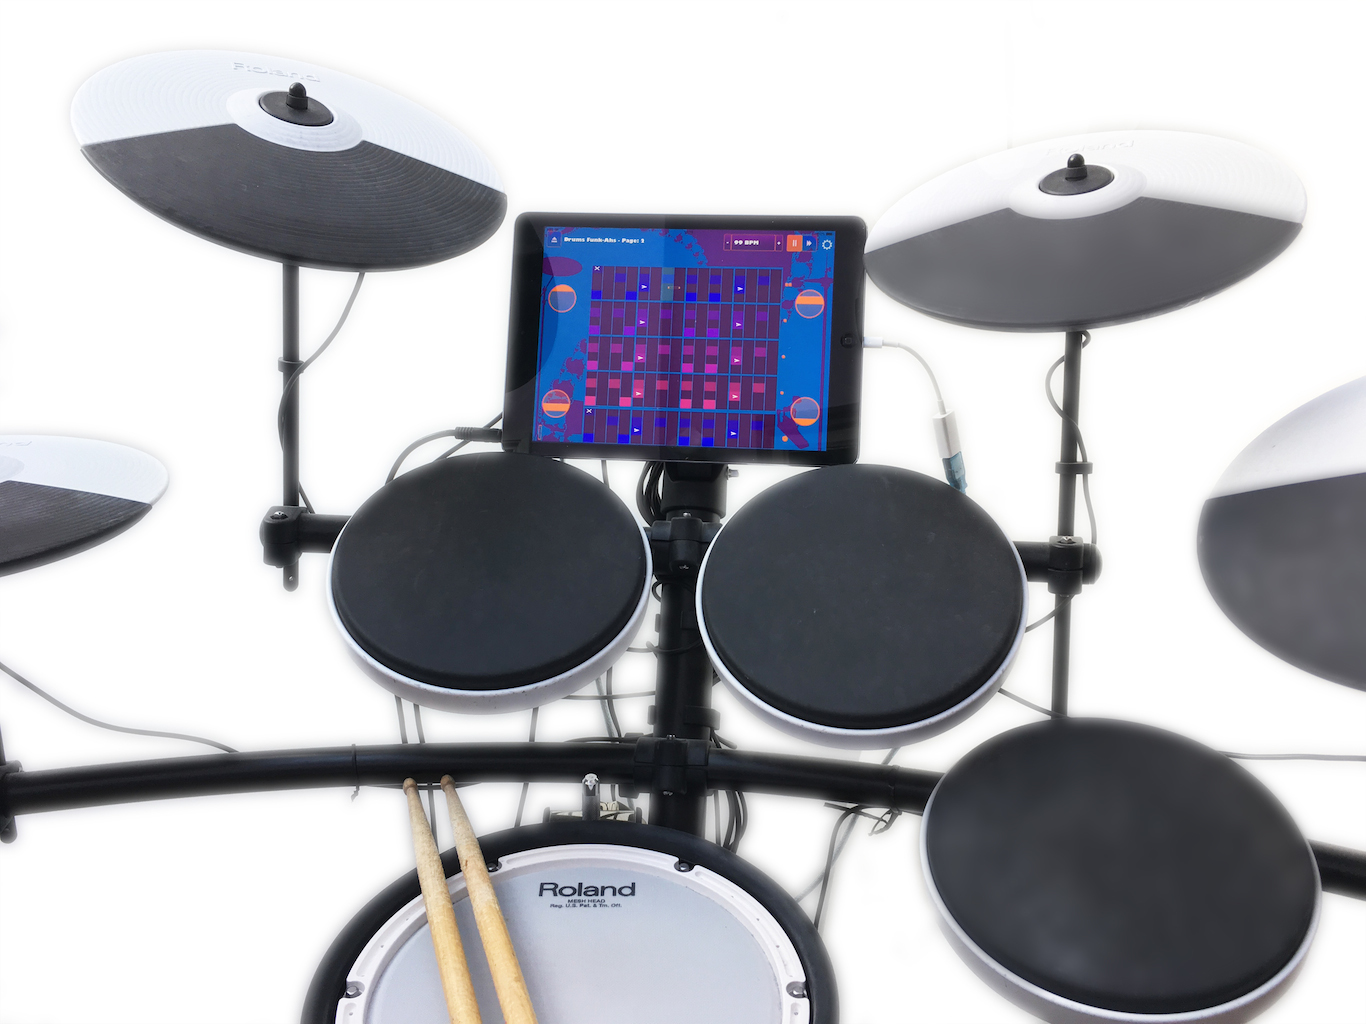 Funktris on an iPad and Roland drum set